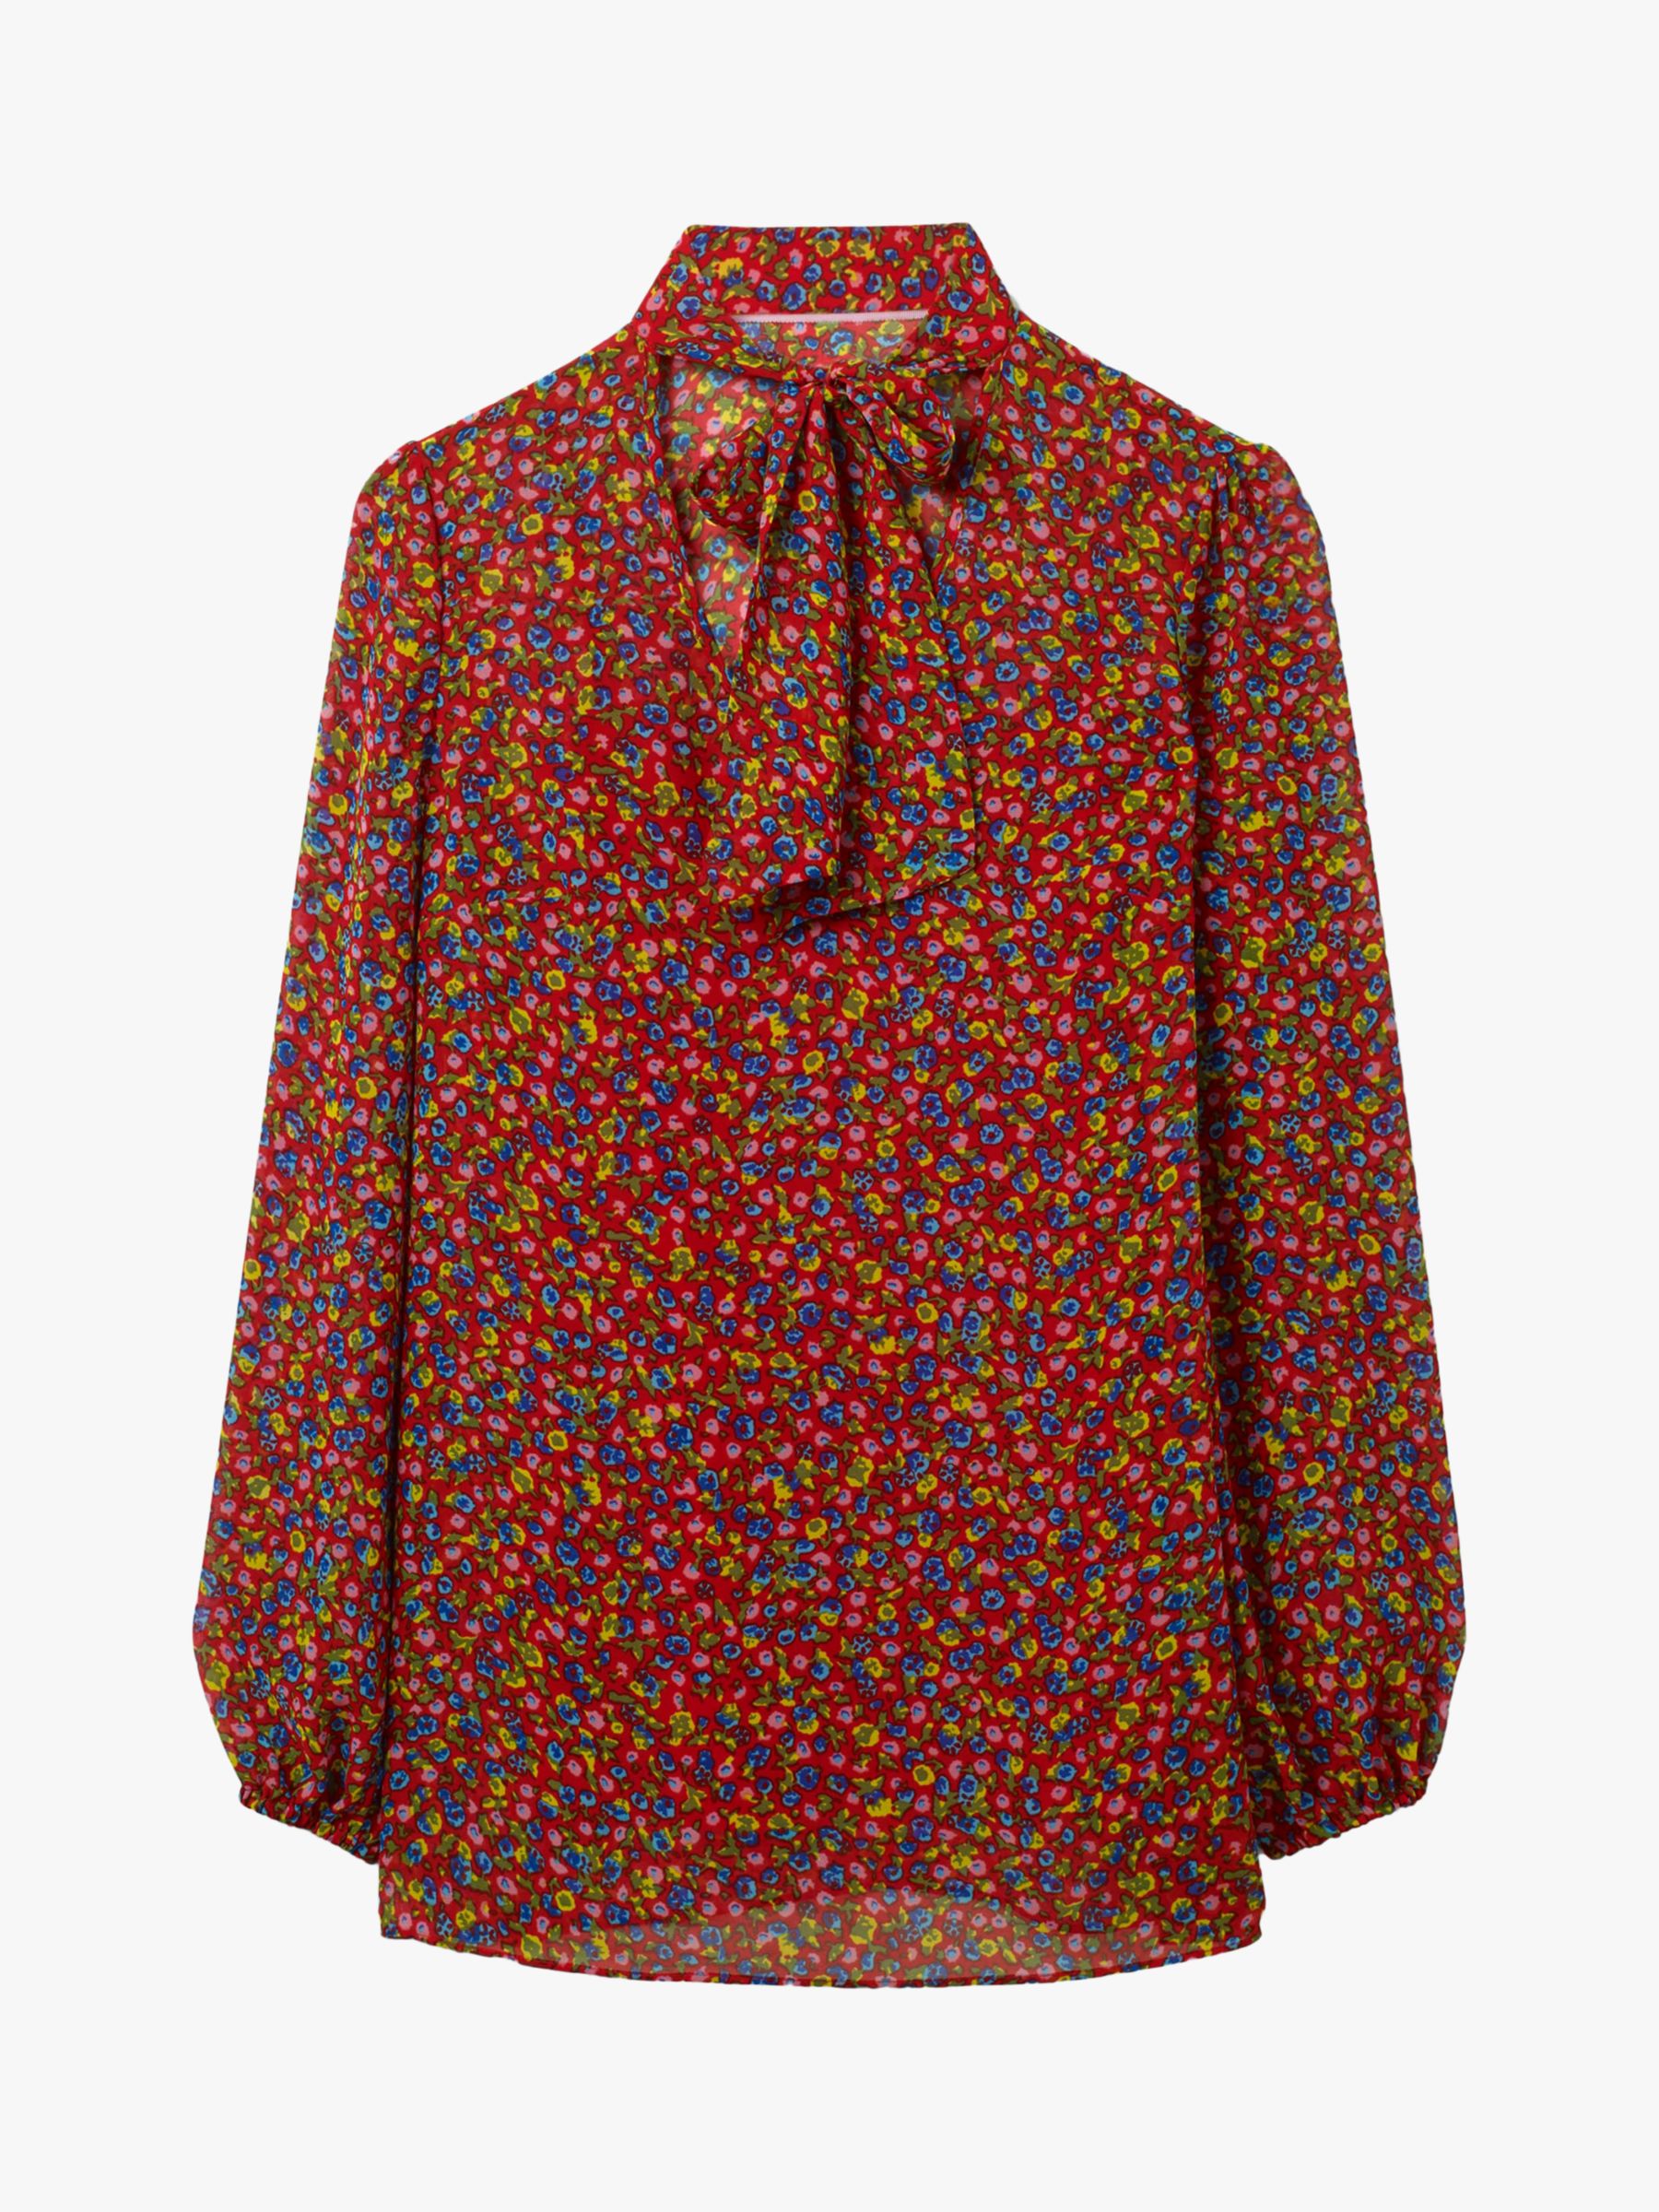 Boden Imogen Floral Tie Neck Blouse | Red English Ditsy at John Lewis ...